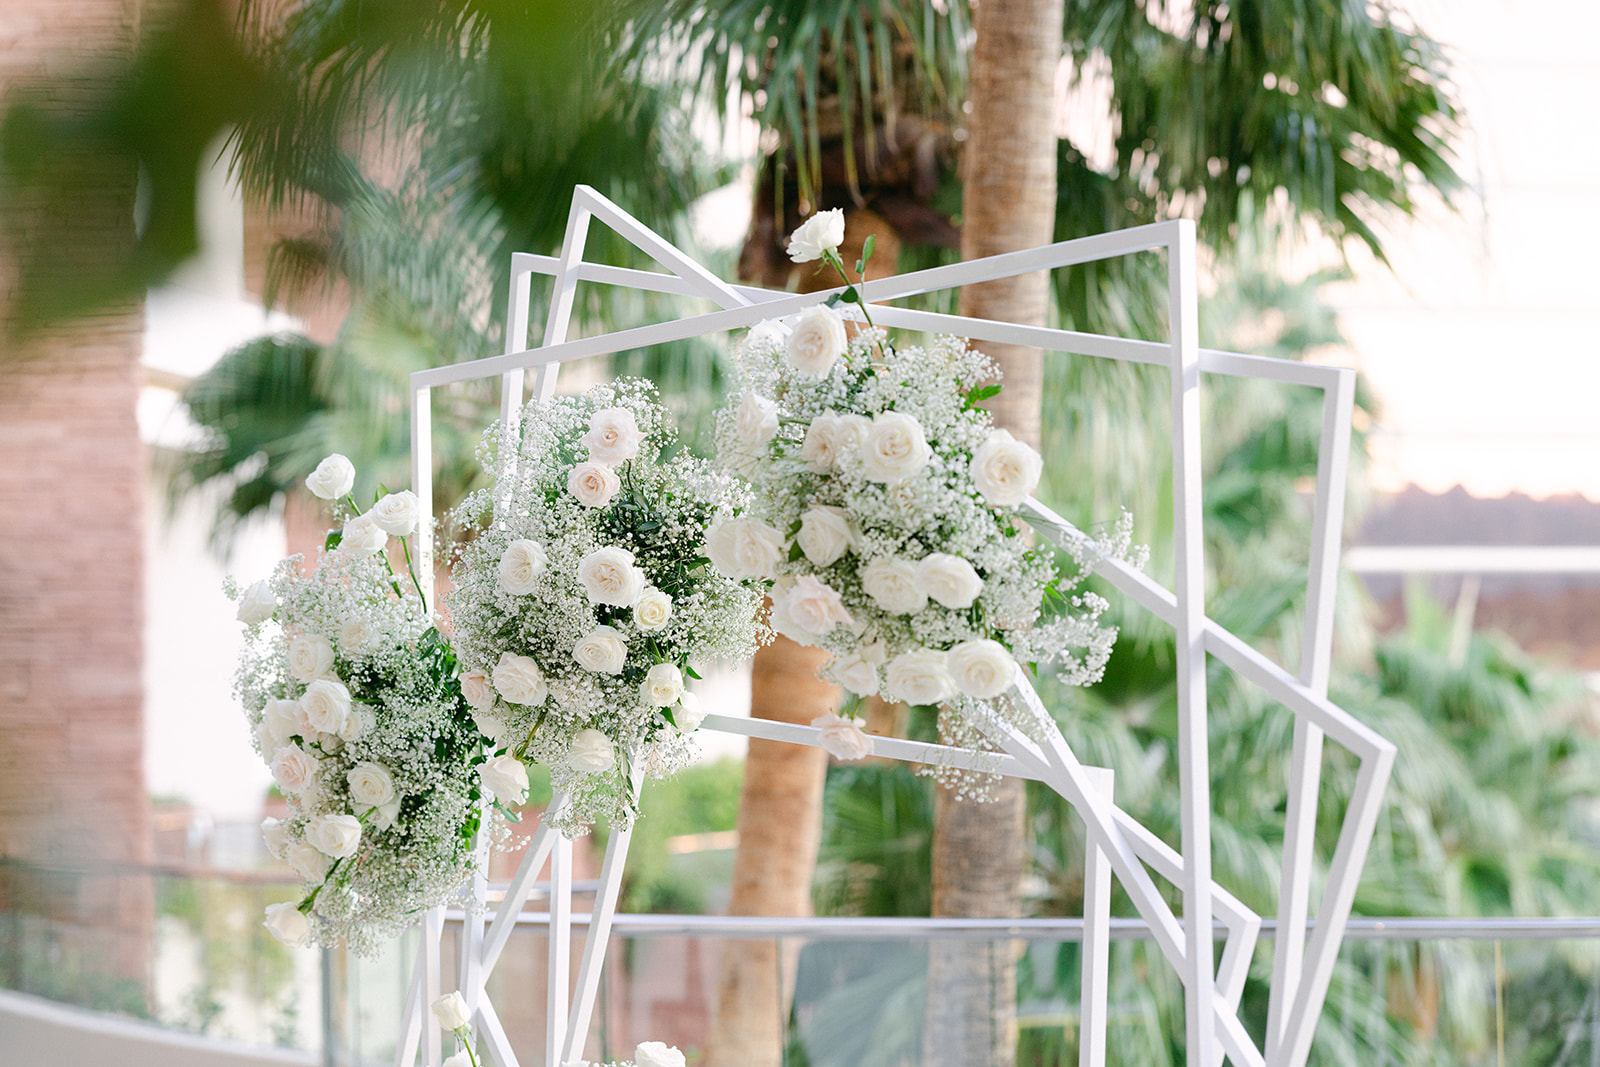 White rose and baby's breath floral attachments for modern arch 